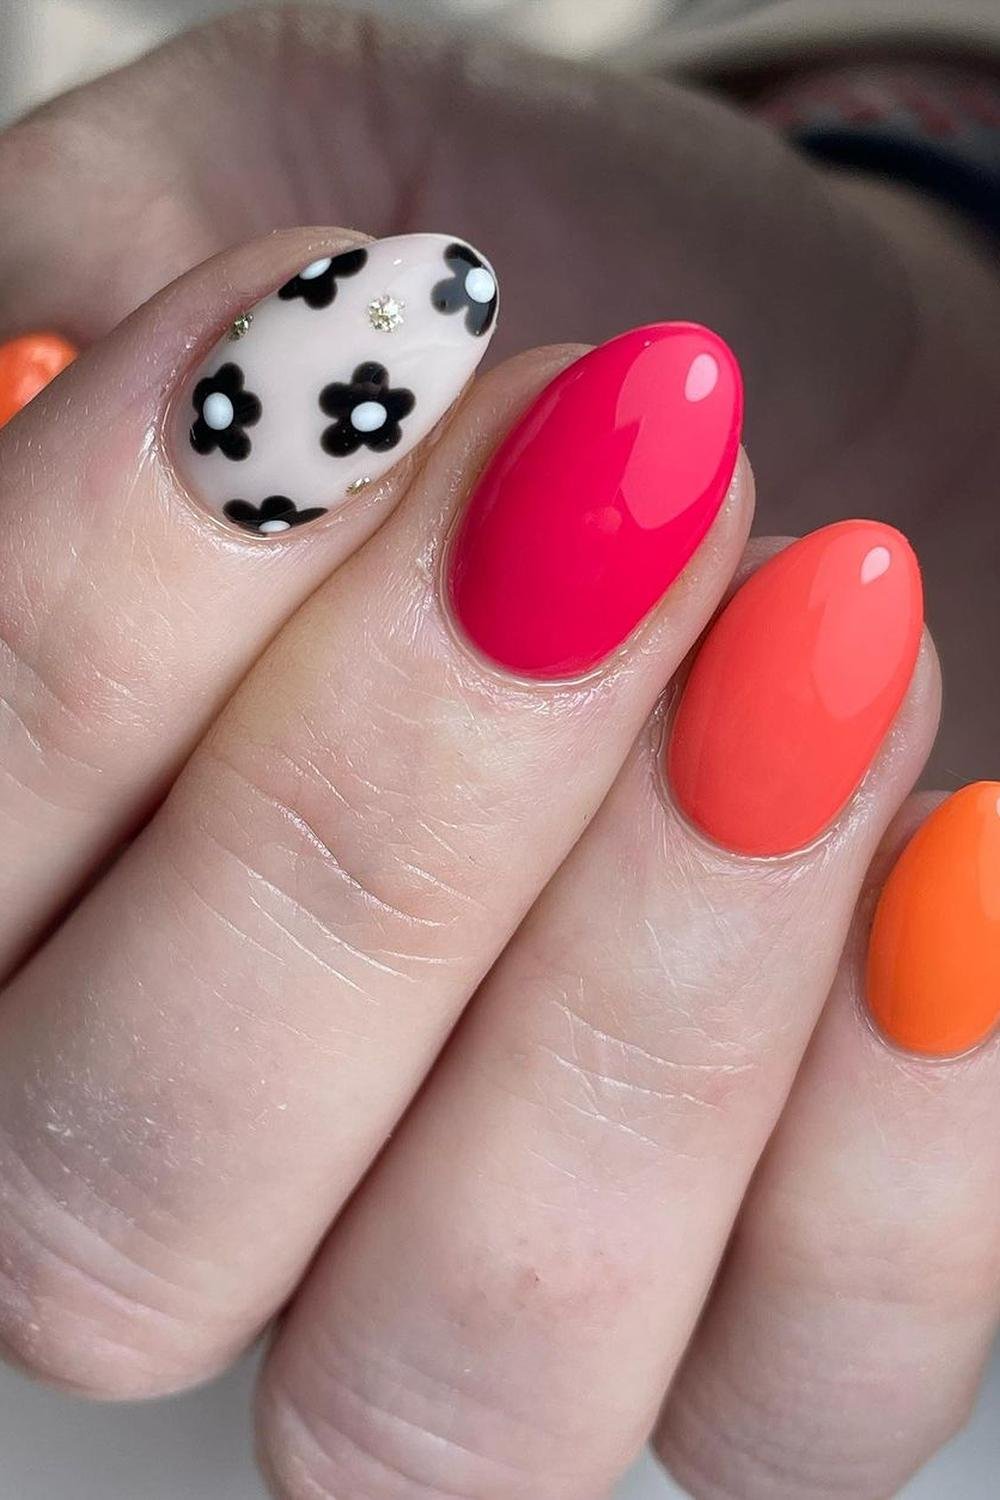 13 - Picture of Pink and Orange Nails